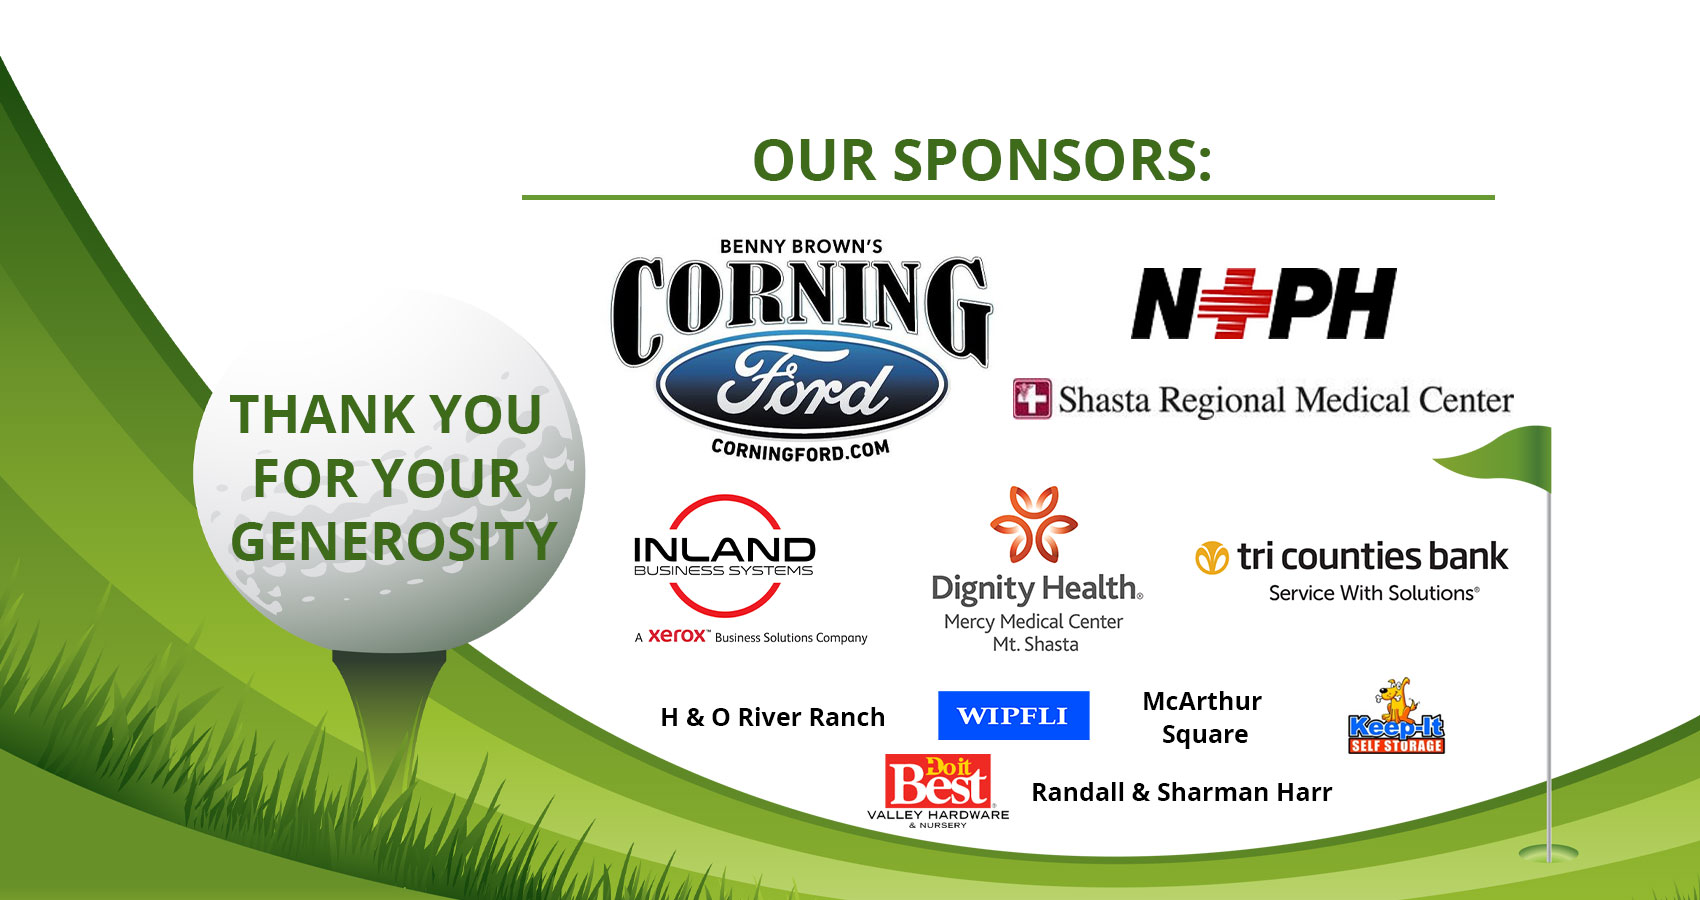 Graphic banner of a T and golf ball and numerous logos. Banner says:
THANK YOU FOR YOUR GENEROSITY

OUR SPONSORS:
BENNY BROWN'S CORNING FORD
CORNINGFORD.COM
N+ph
Shasta Regional Medical Center
INLAND BUSINESS SYSTEMS
Dignity Health- Mercy Medical Center Mt. Shasta
tri counties bank-Service with Solutions
H & O River Ranch
WIPFI 
McArthur Square
Jeep-It - SELF STORAGE
Randall & Sharman Harr
Do it Best - VALLEY HARDWARE